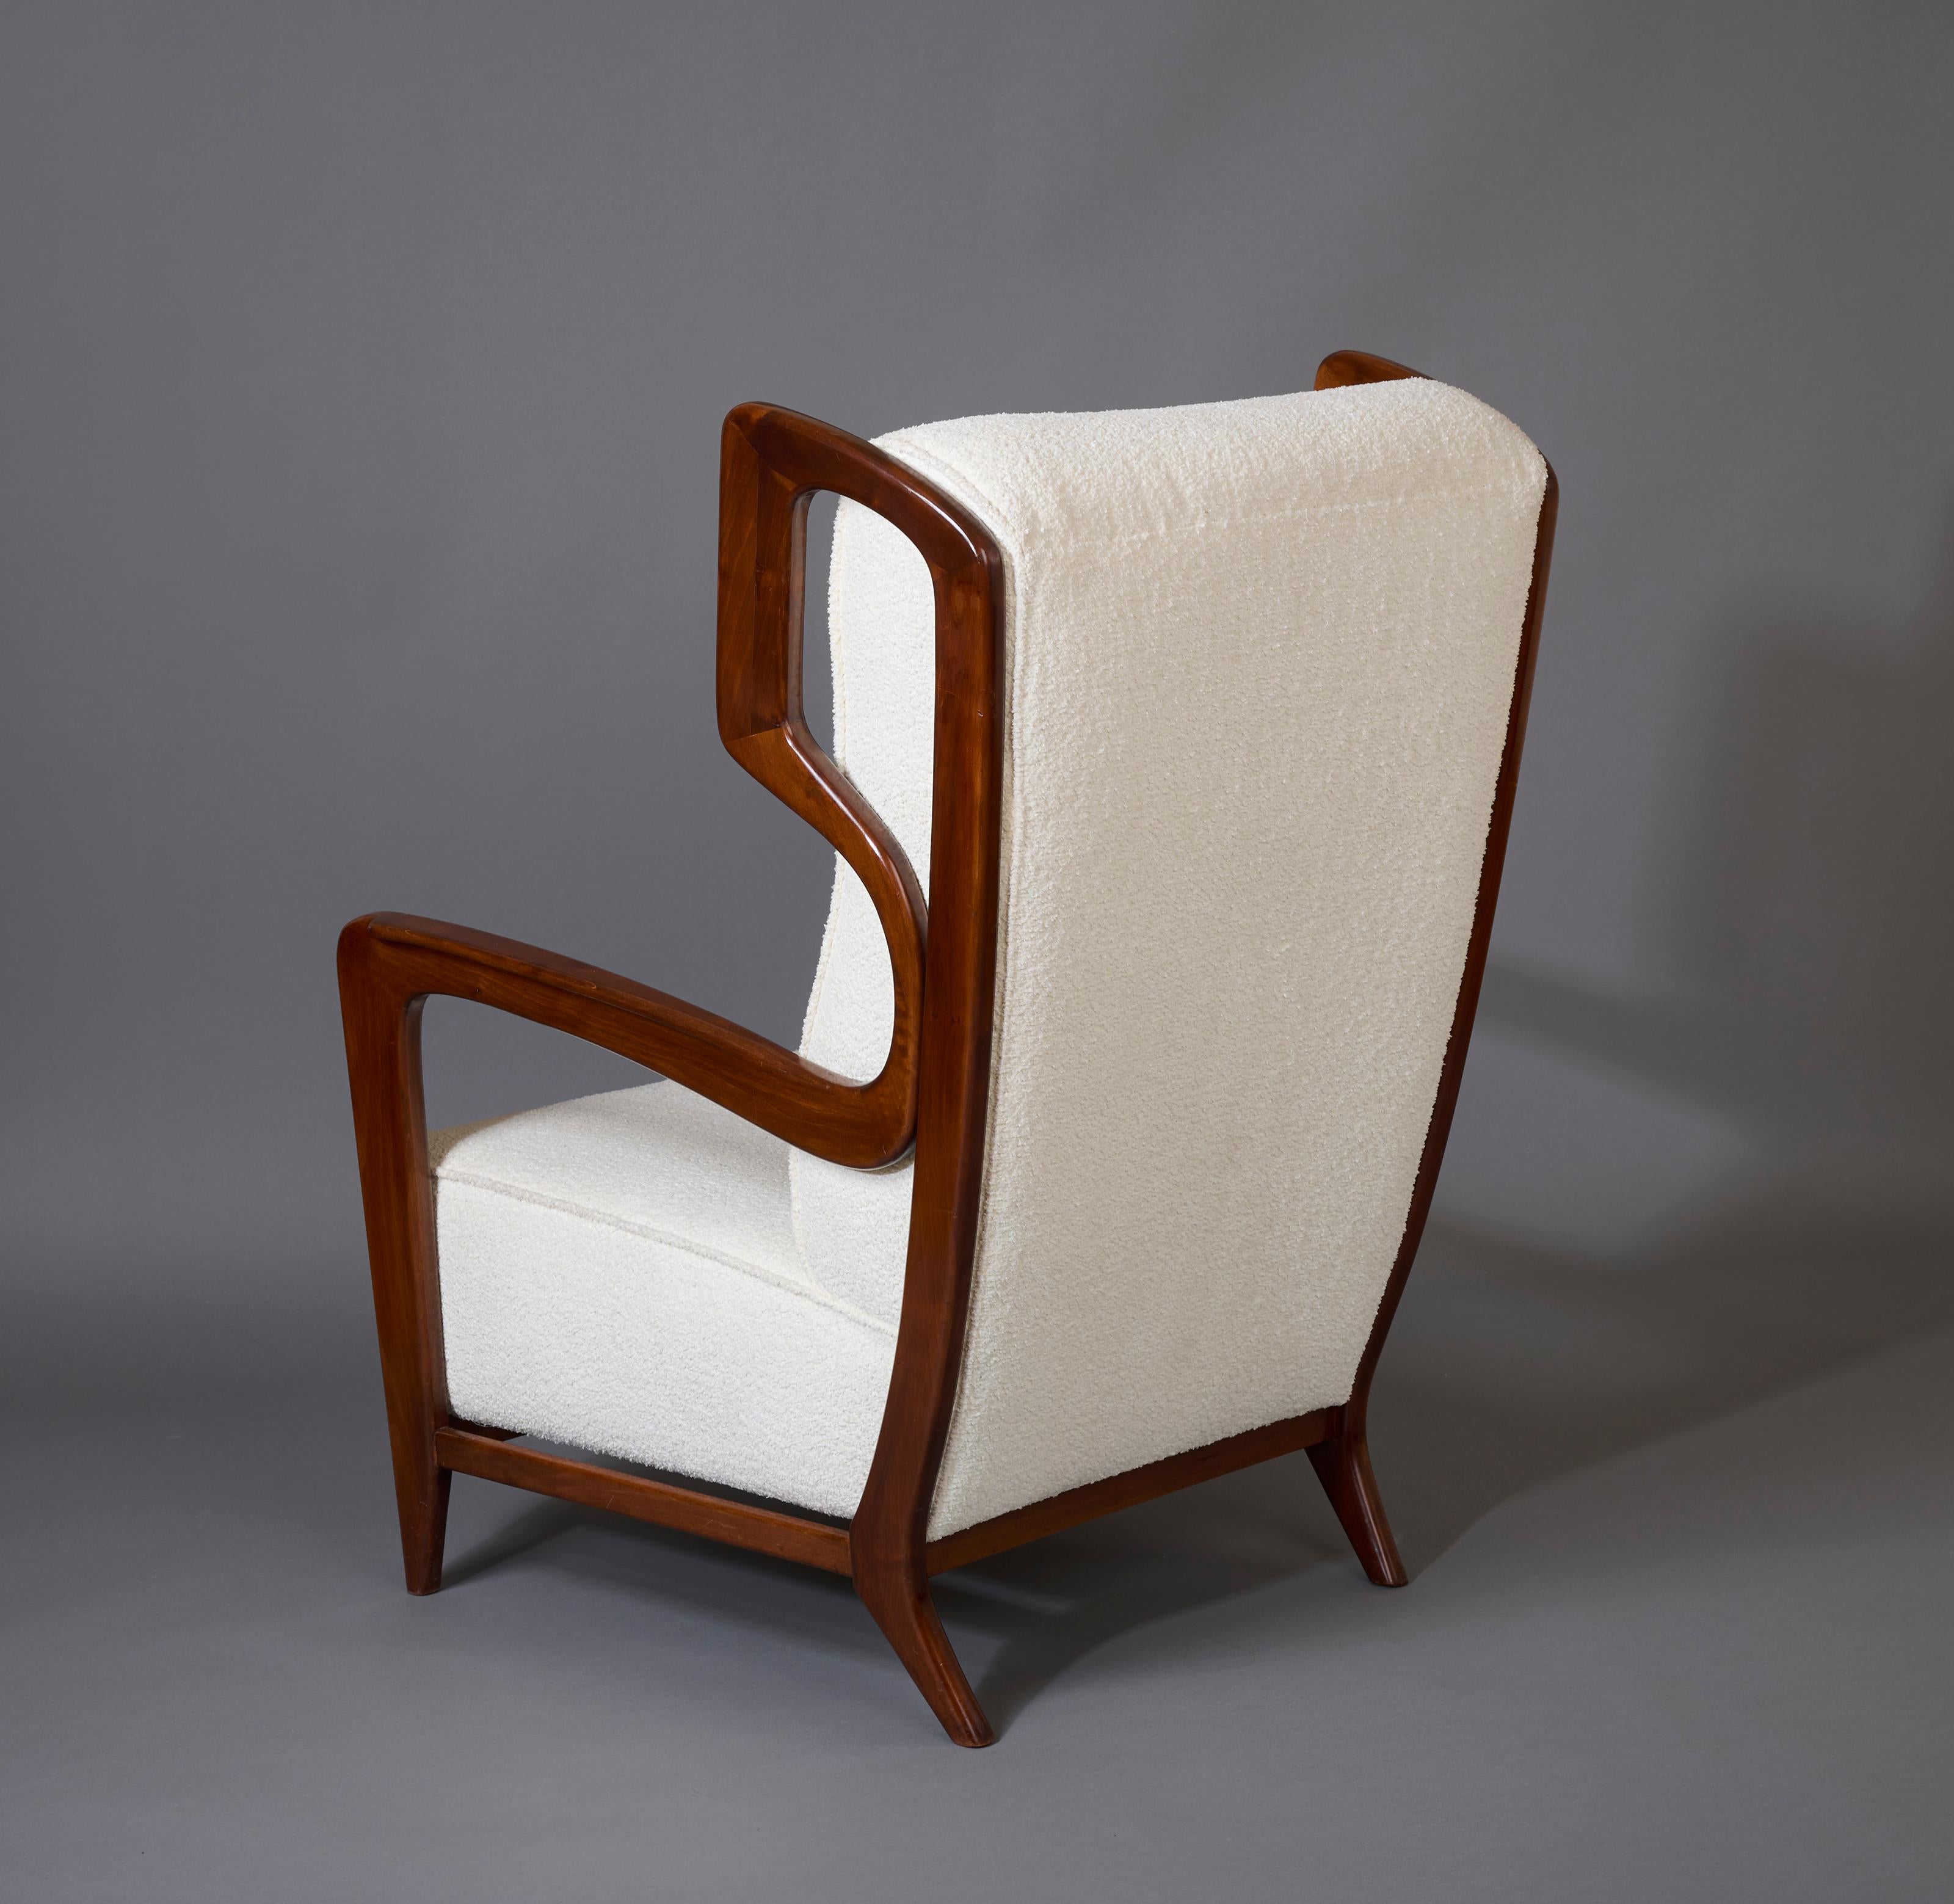 Gio Ponti, Exceptional Pair of Rare Wingback Armchairs in Walnut, Italy, 1940s For Sale 7